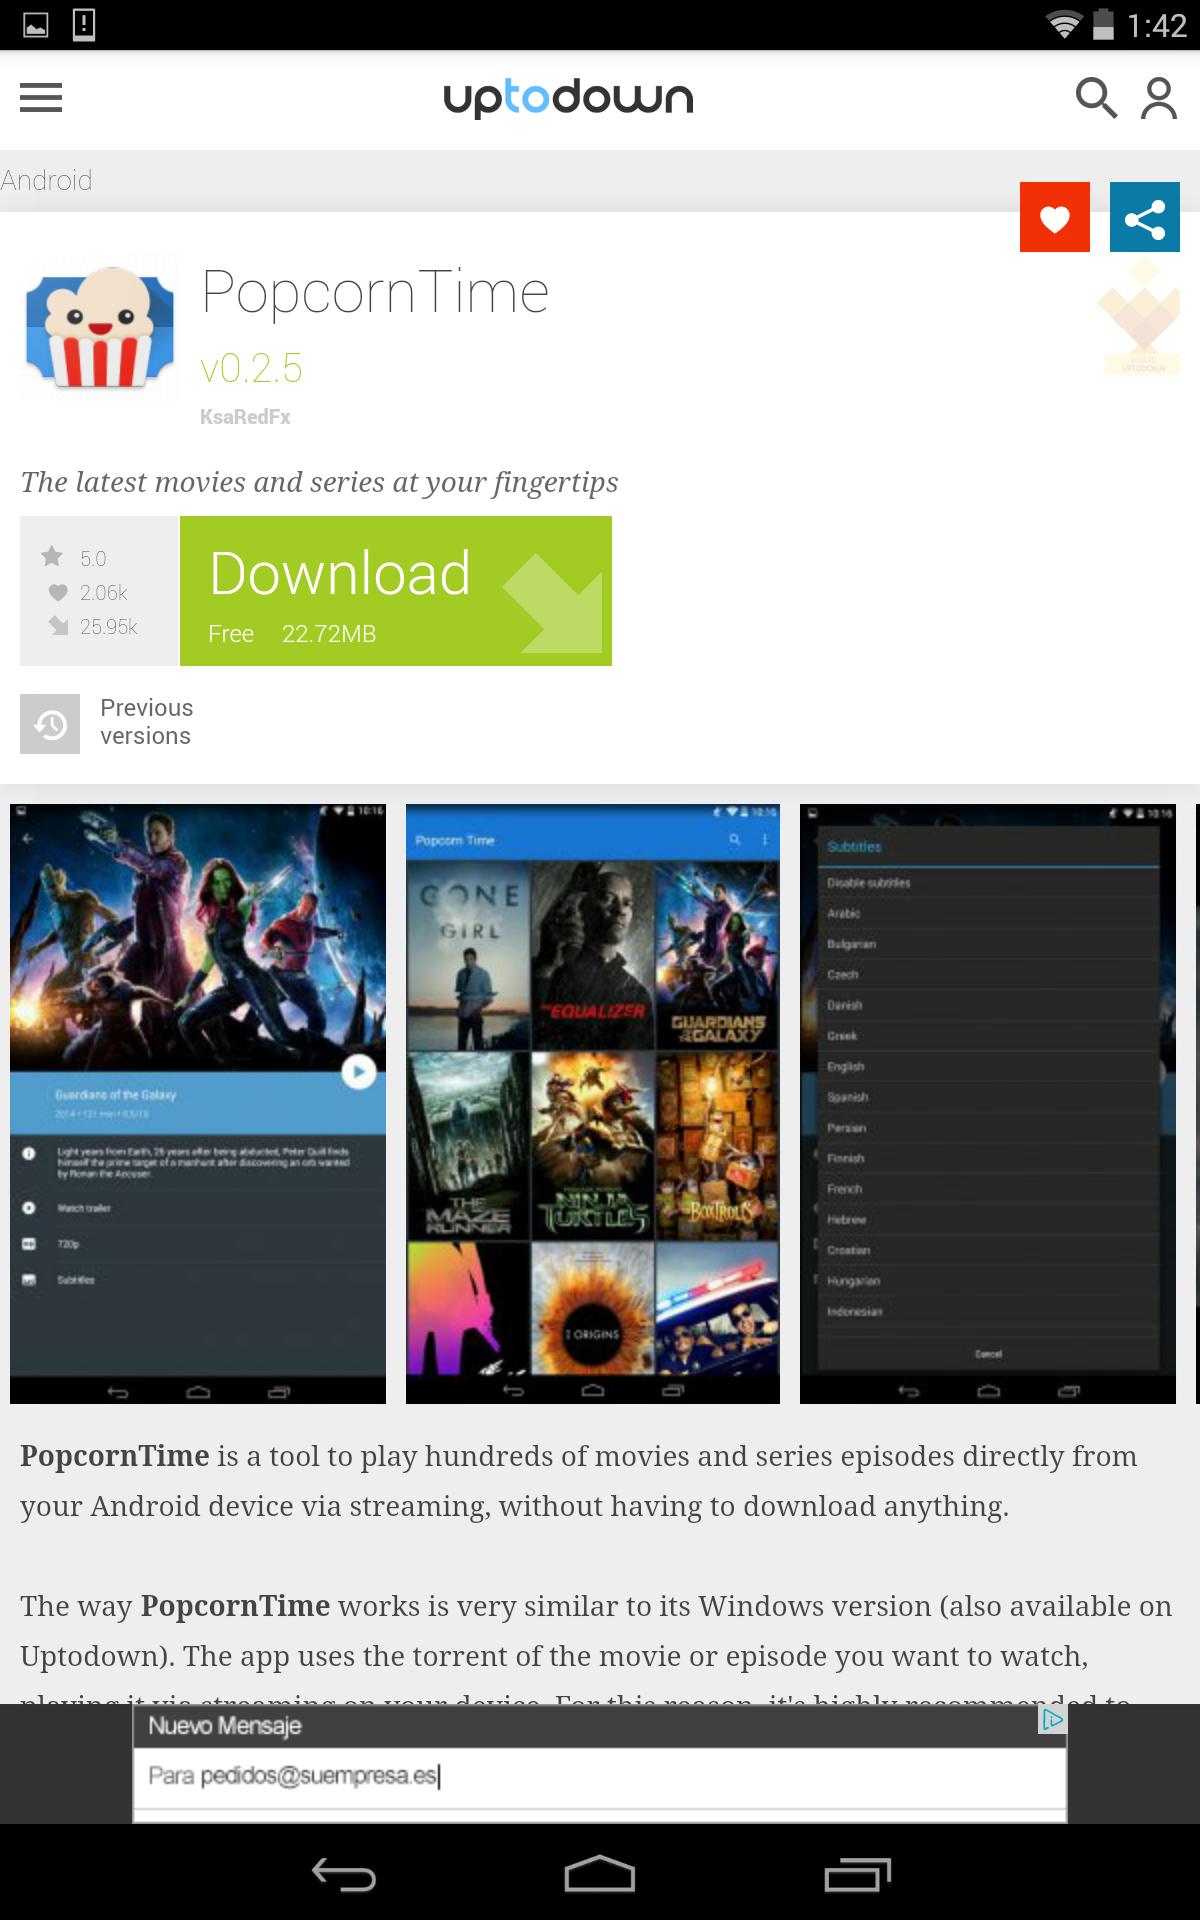 Uptodown Lite For Android Apk Download It's lightweight and respects your privacy while allowing you to surf the internet faster, even on slow or congested networks. uptodown lite for android apk download